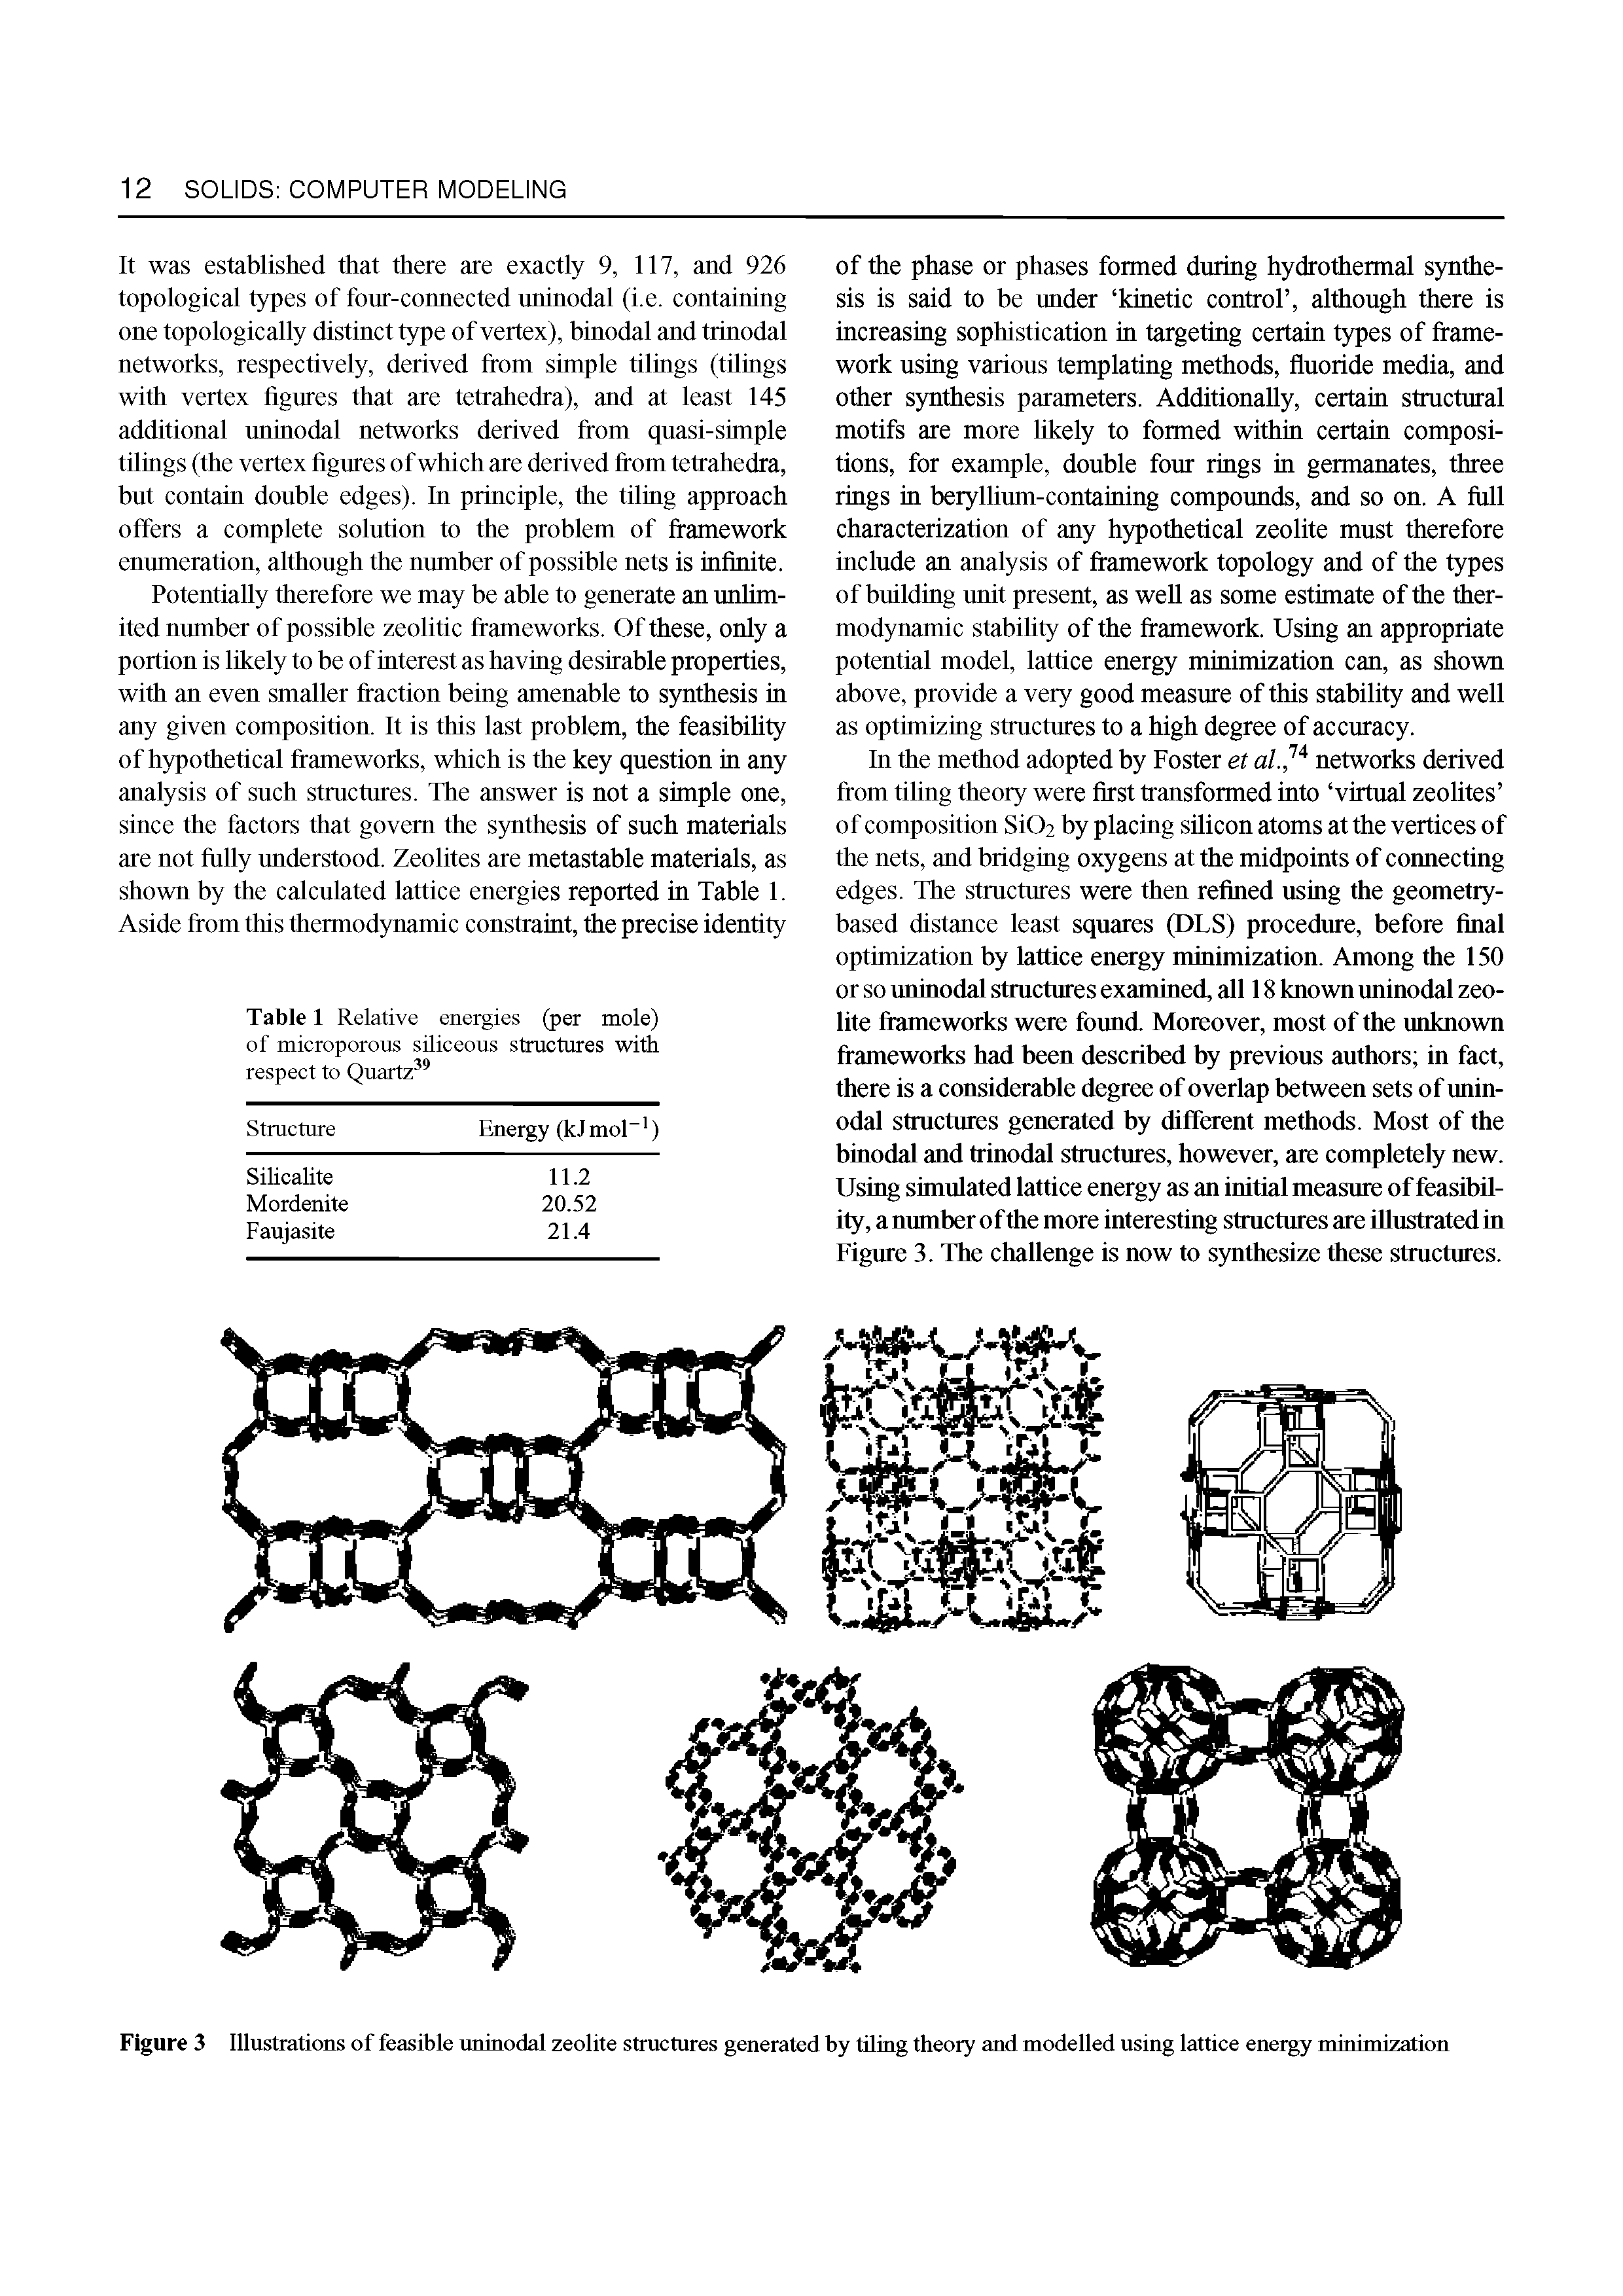 Figure 3 Illustrations of feasible uninodal zeolite structures generated by thing theory and modelled using lattice energy minimization...